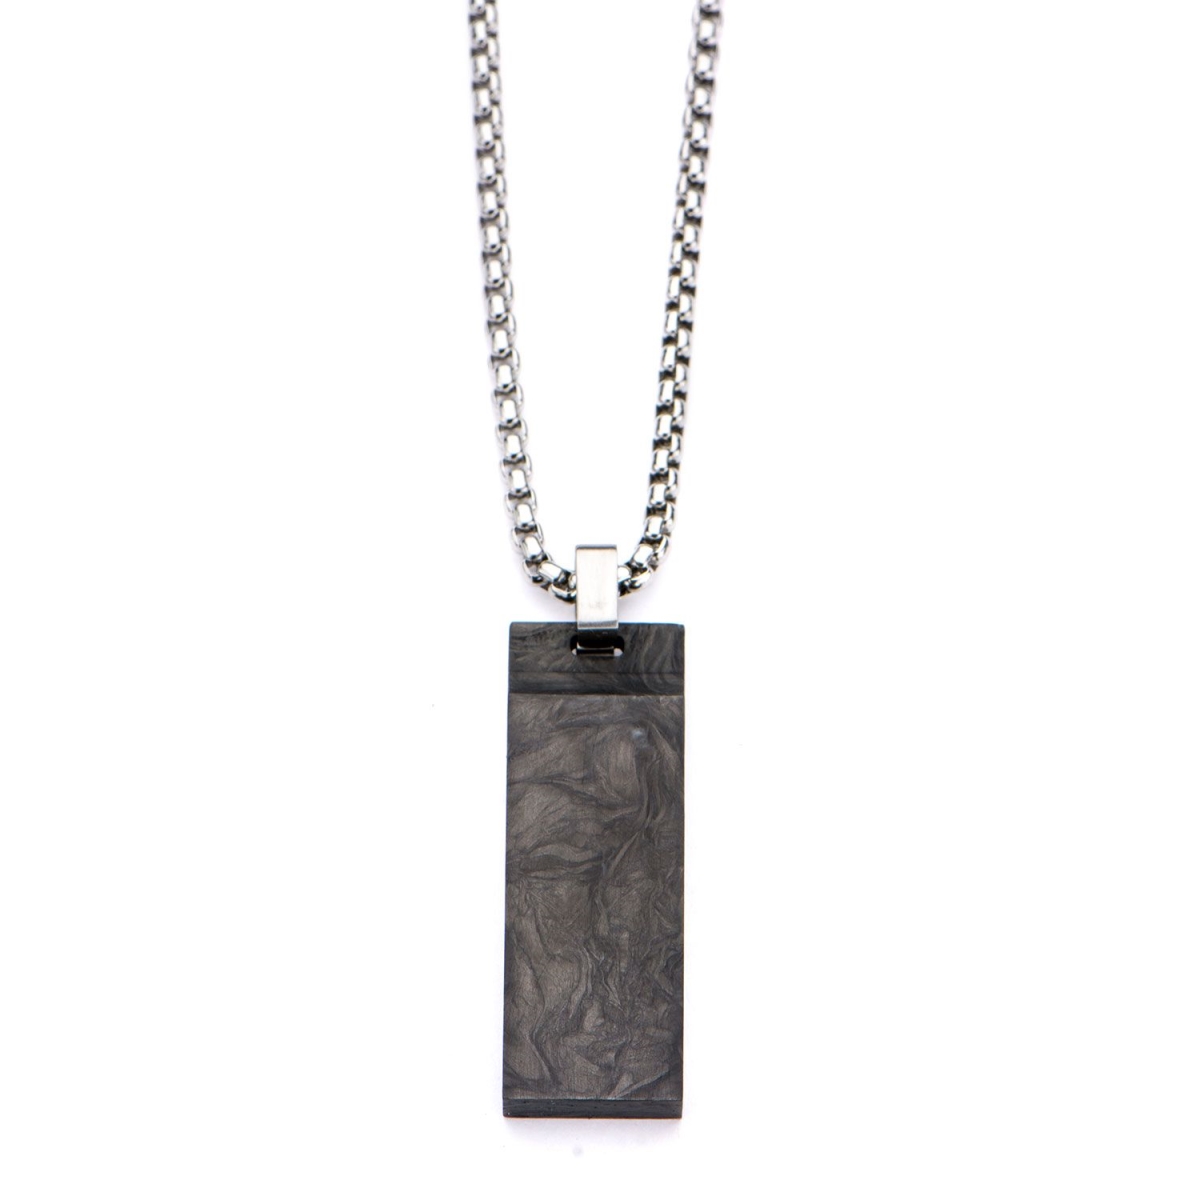 Sspcf0013nk1 Solid Carbon Graphite & Stainless Steel Dog Tag Pendant With Chain